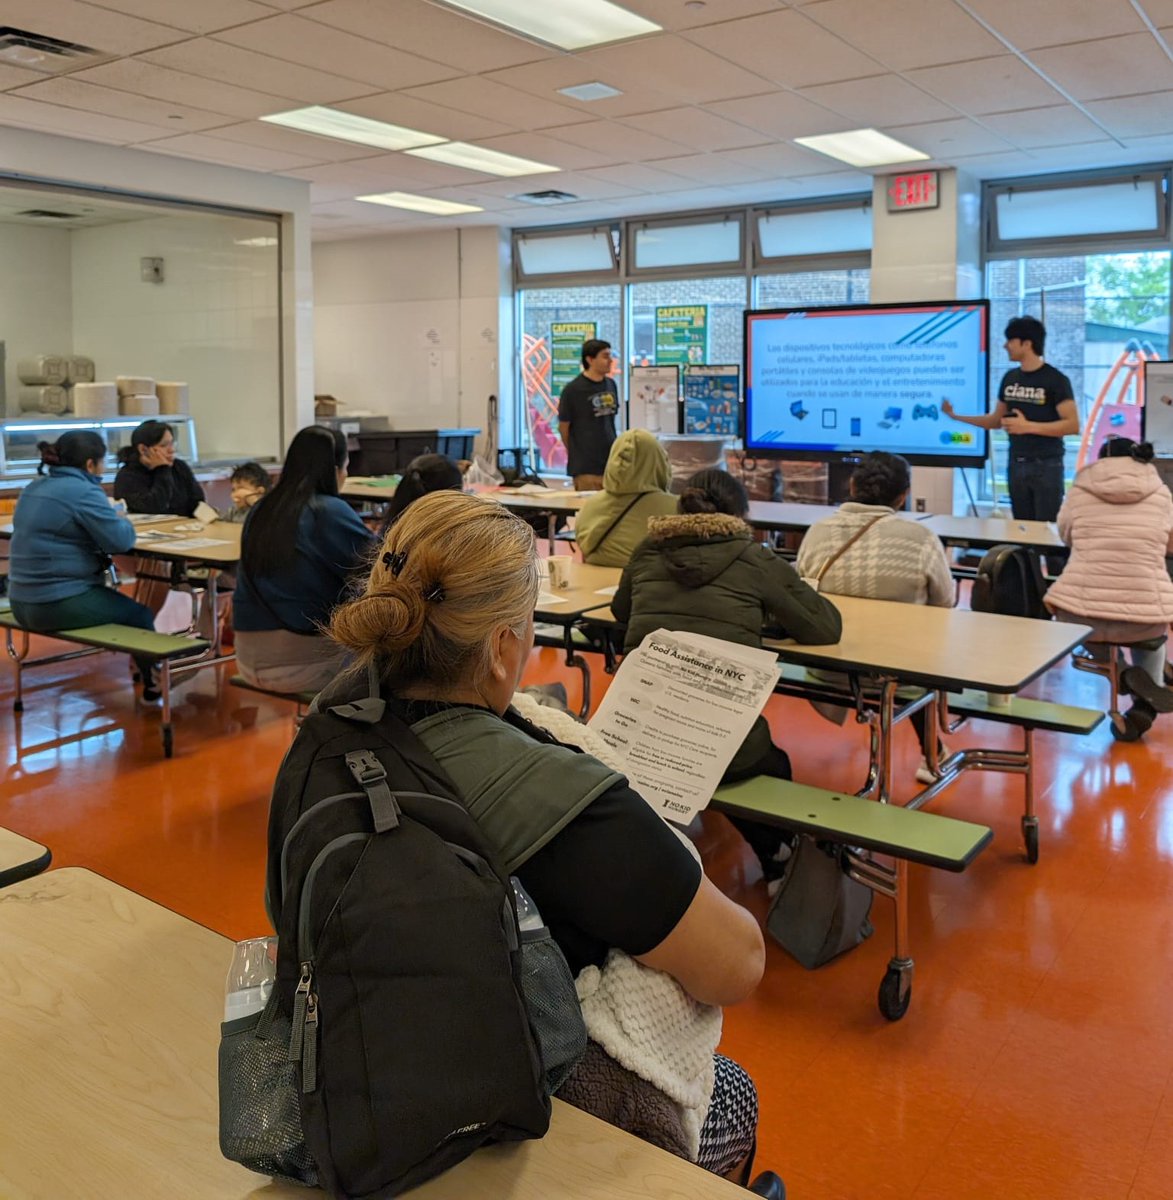 The idea to hold #DigitalSafety workshops that we’ve been leading since March was first proposed by ordinary NYC residents, then voted on last year during the first cycle of The People’s Money - Citywide #ParticipatoryBudgeting, run by the @NYCCEC.